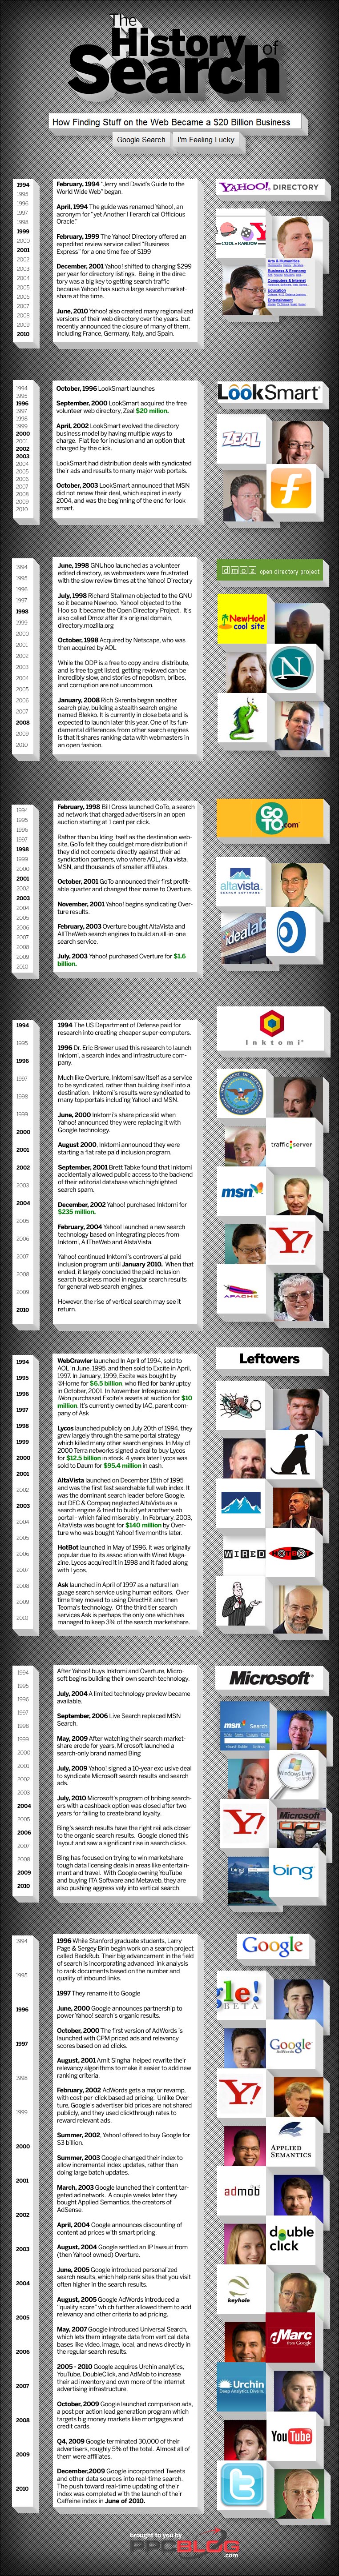 History Of Search